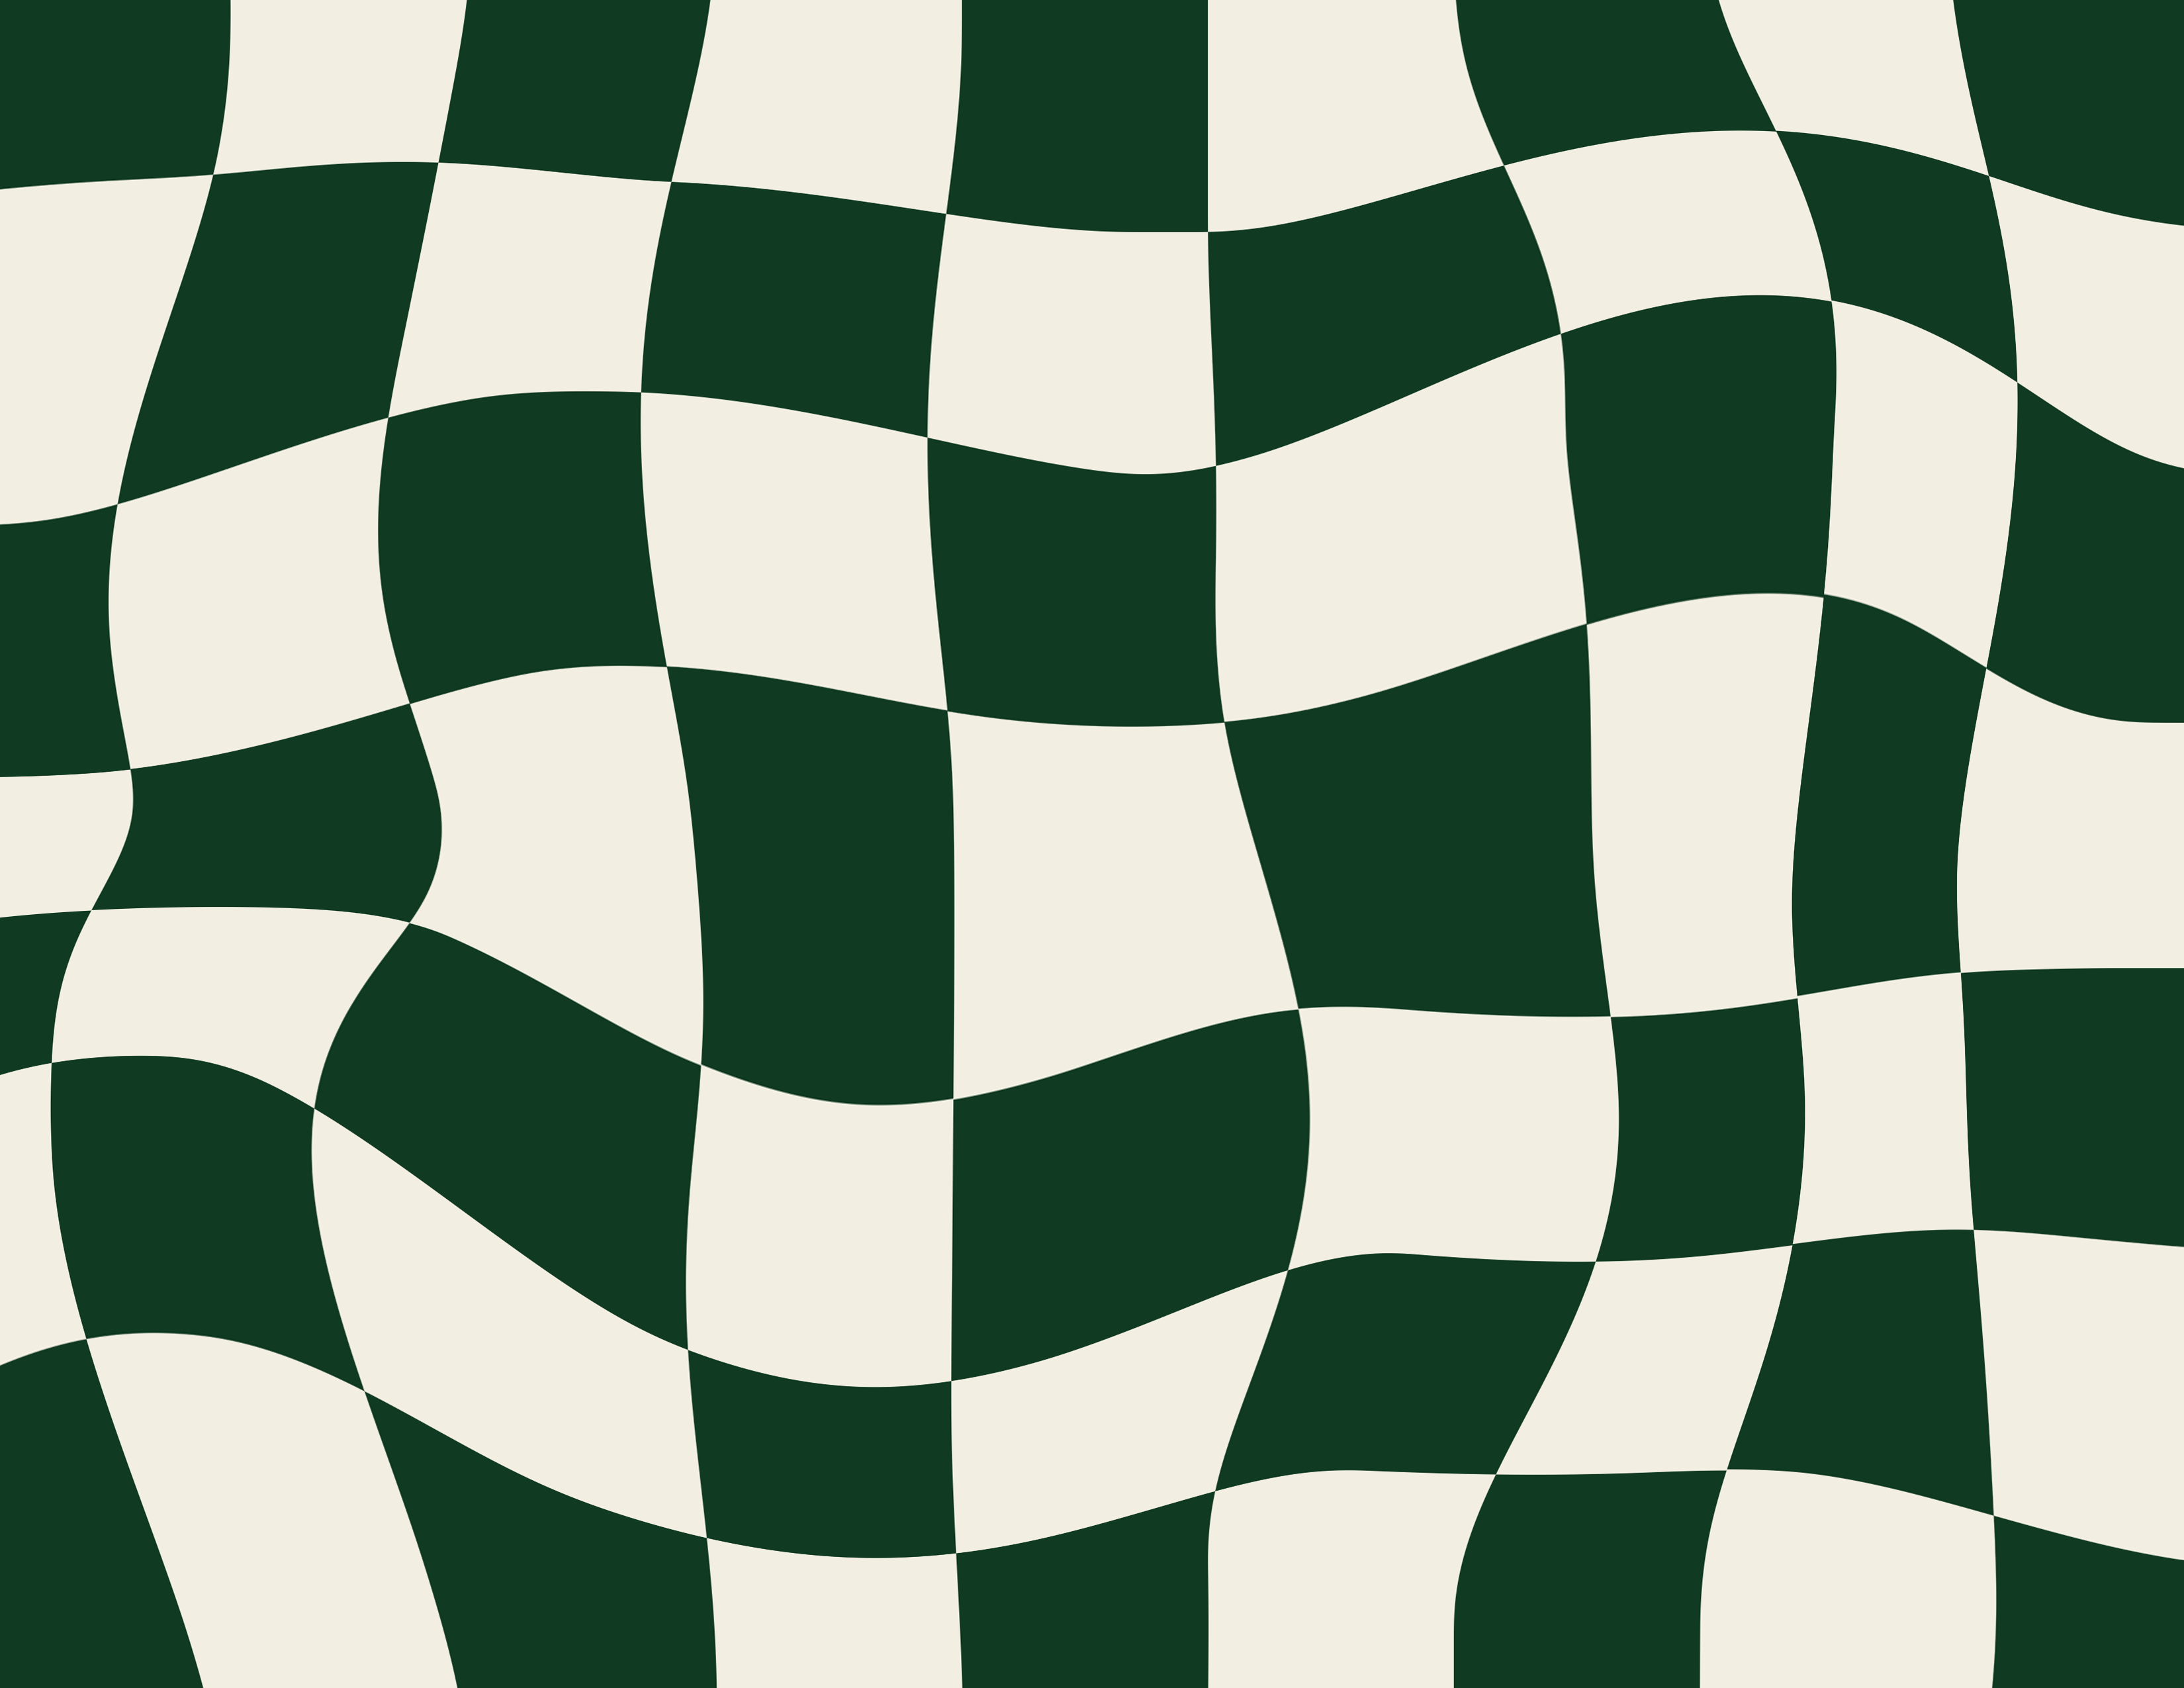 Race Day Athletic checkered racing flag